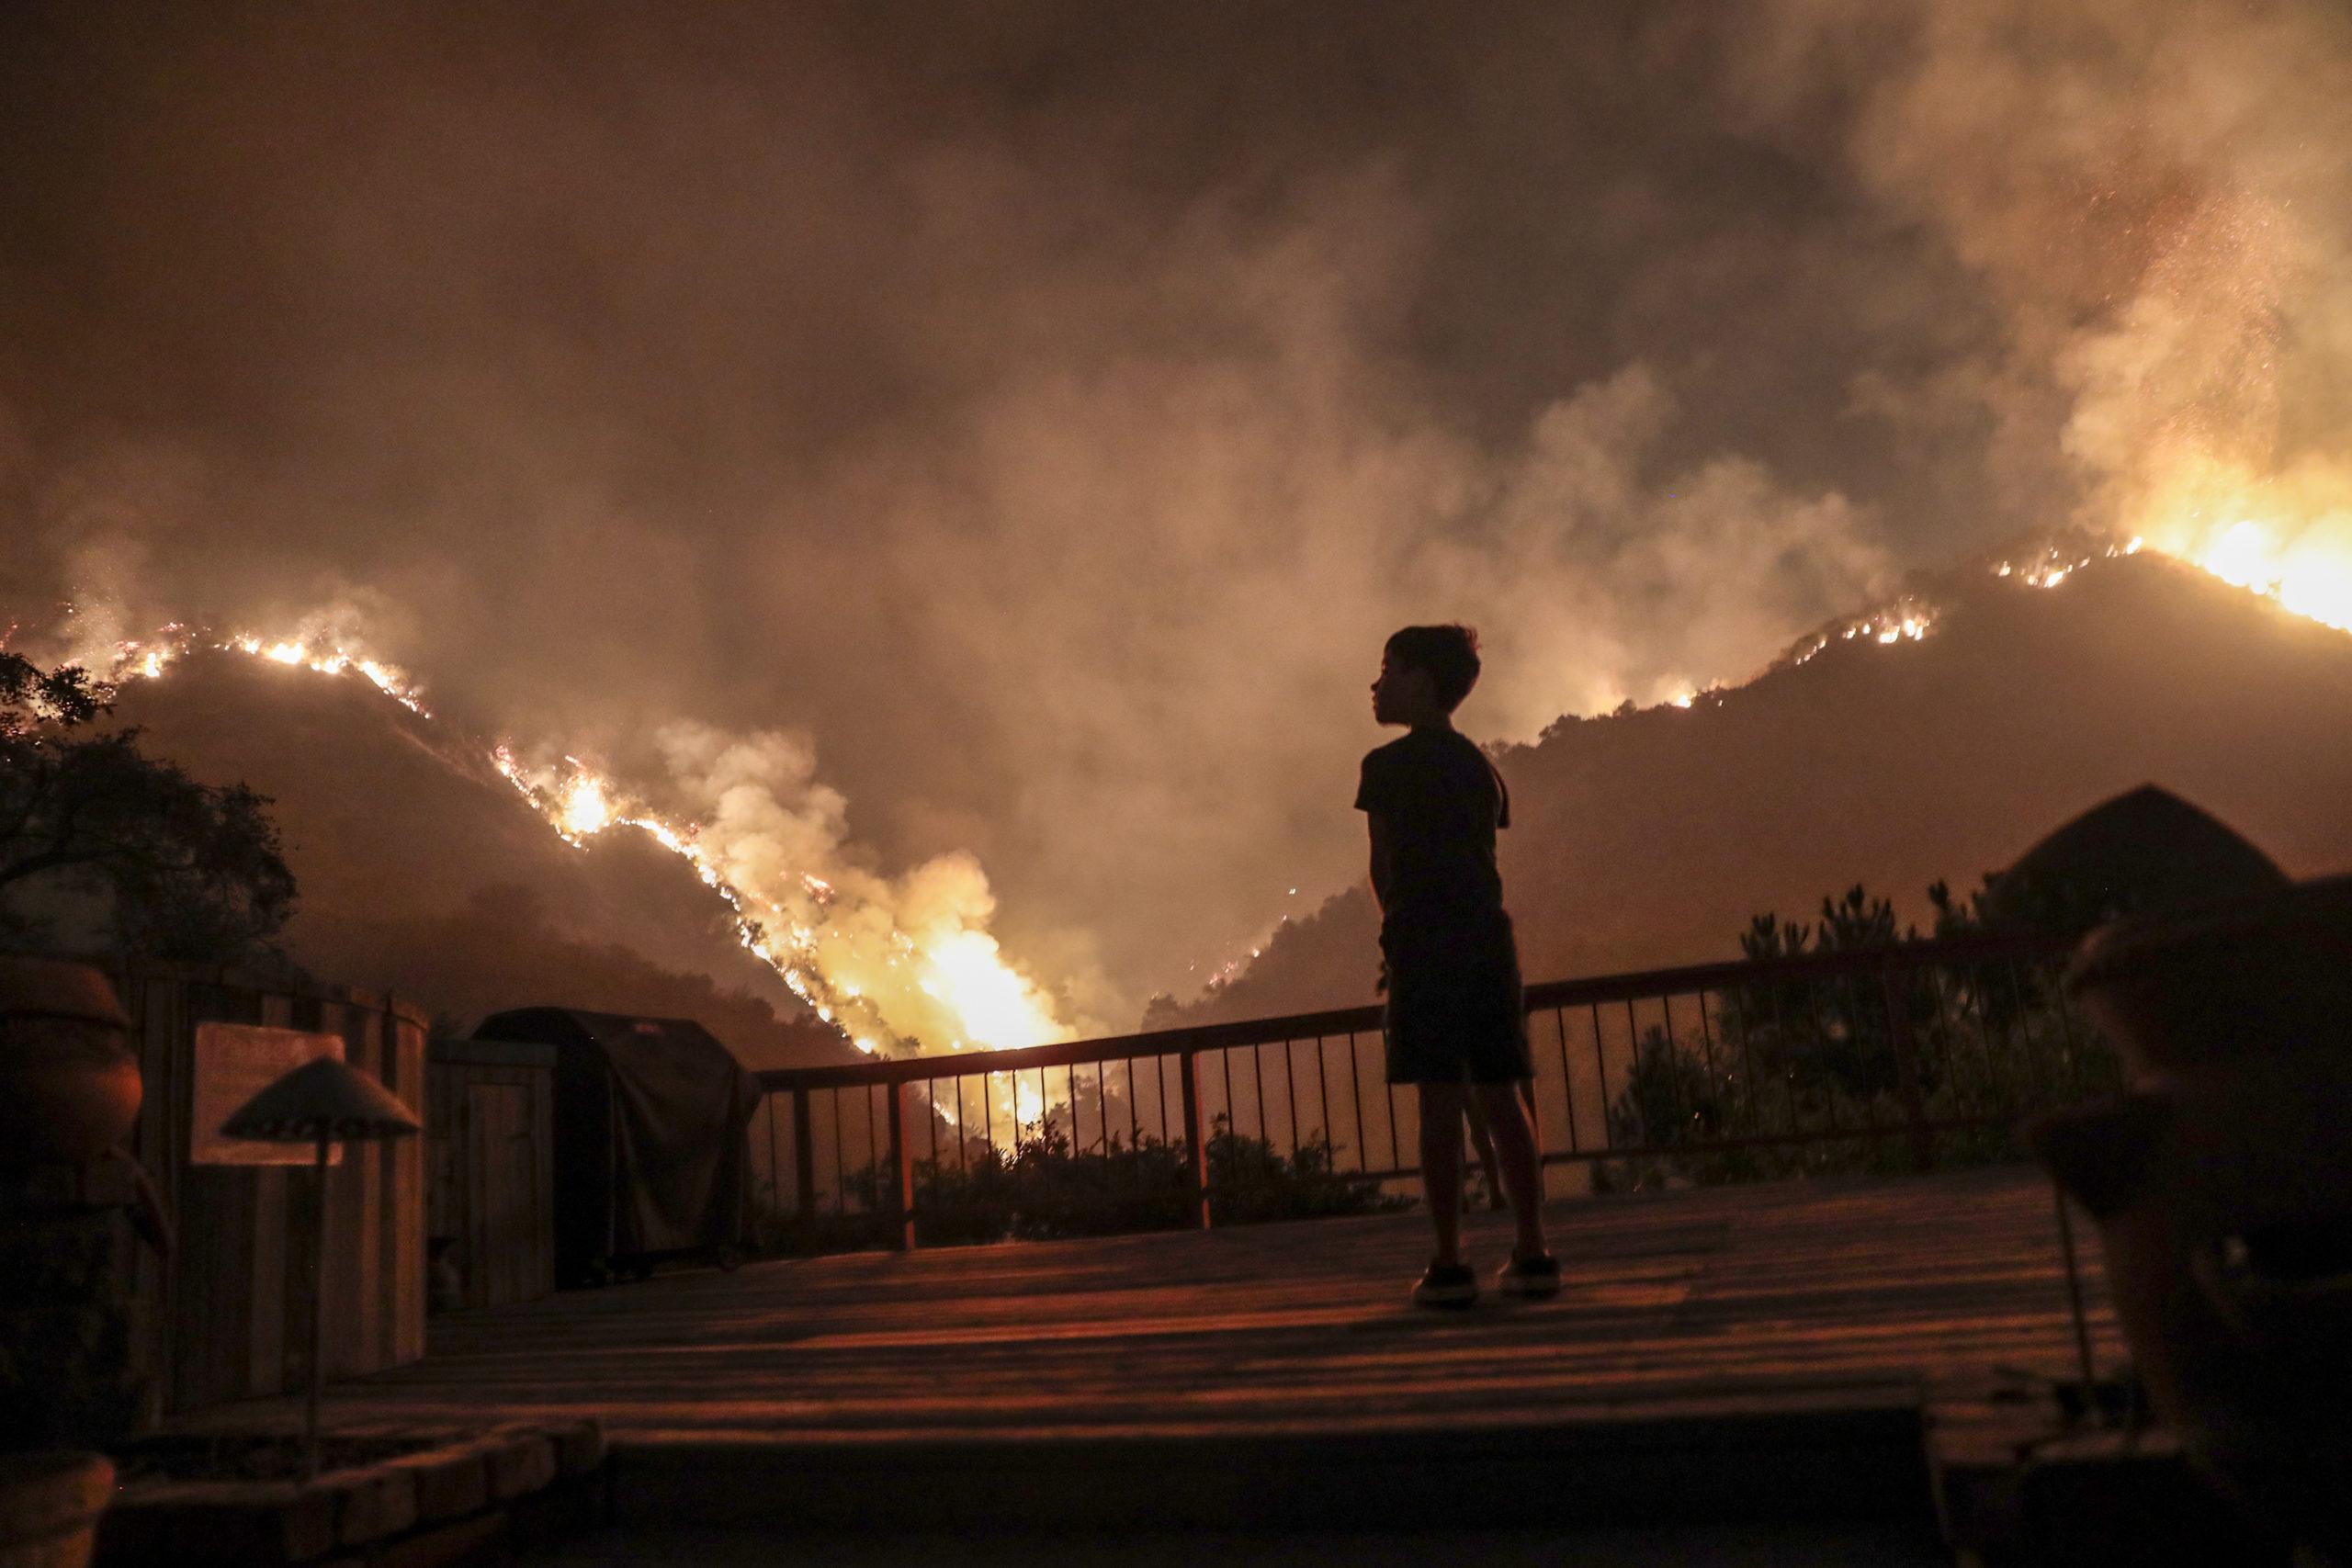 Monrovia, CA, September 15, 2020 - Castle Snider, 8, looks on as flames engulf the hillsides behind his backyard as the Bobcat Fire burns near homes on Oakglade Dr. (Robert Gauthier/ Los Angeles Times/TNS)